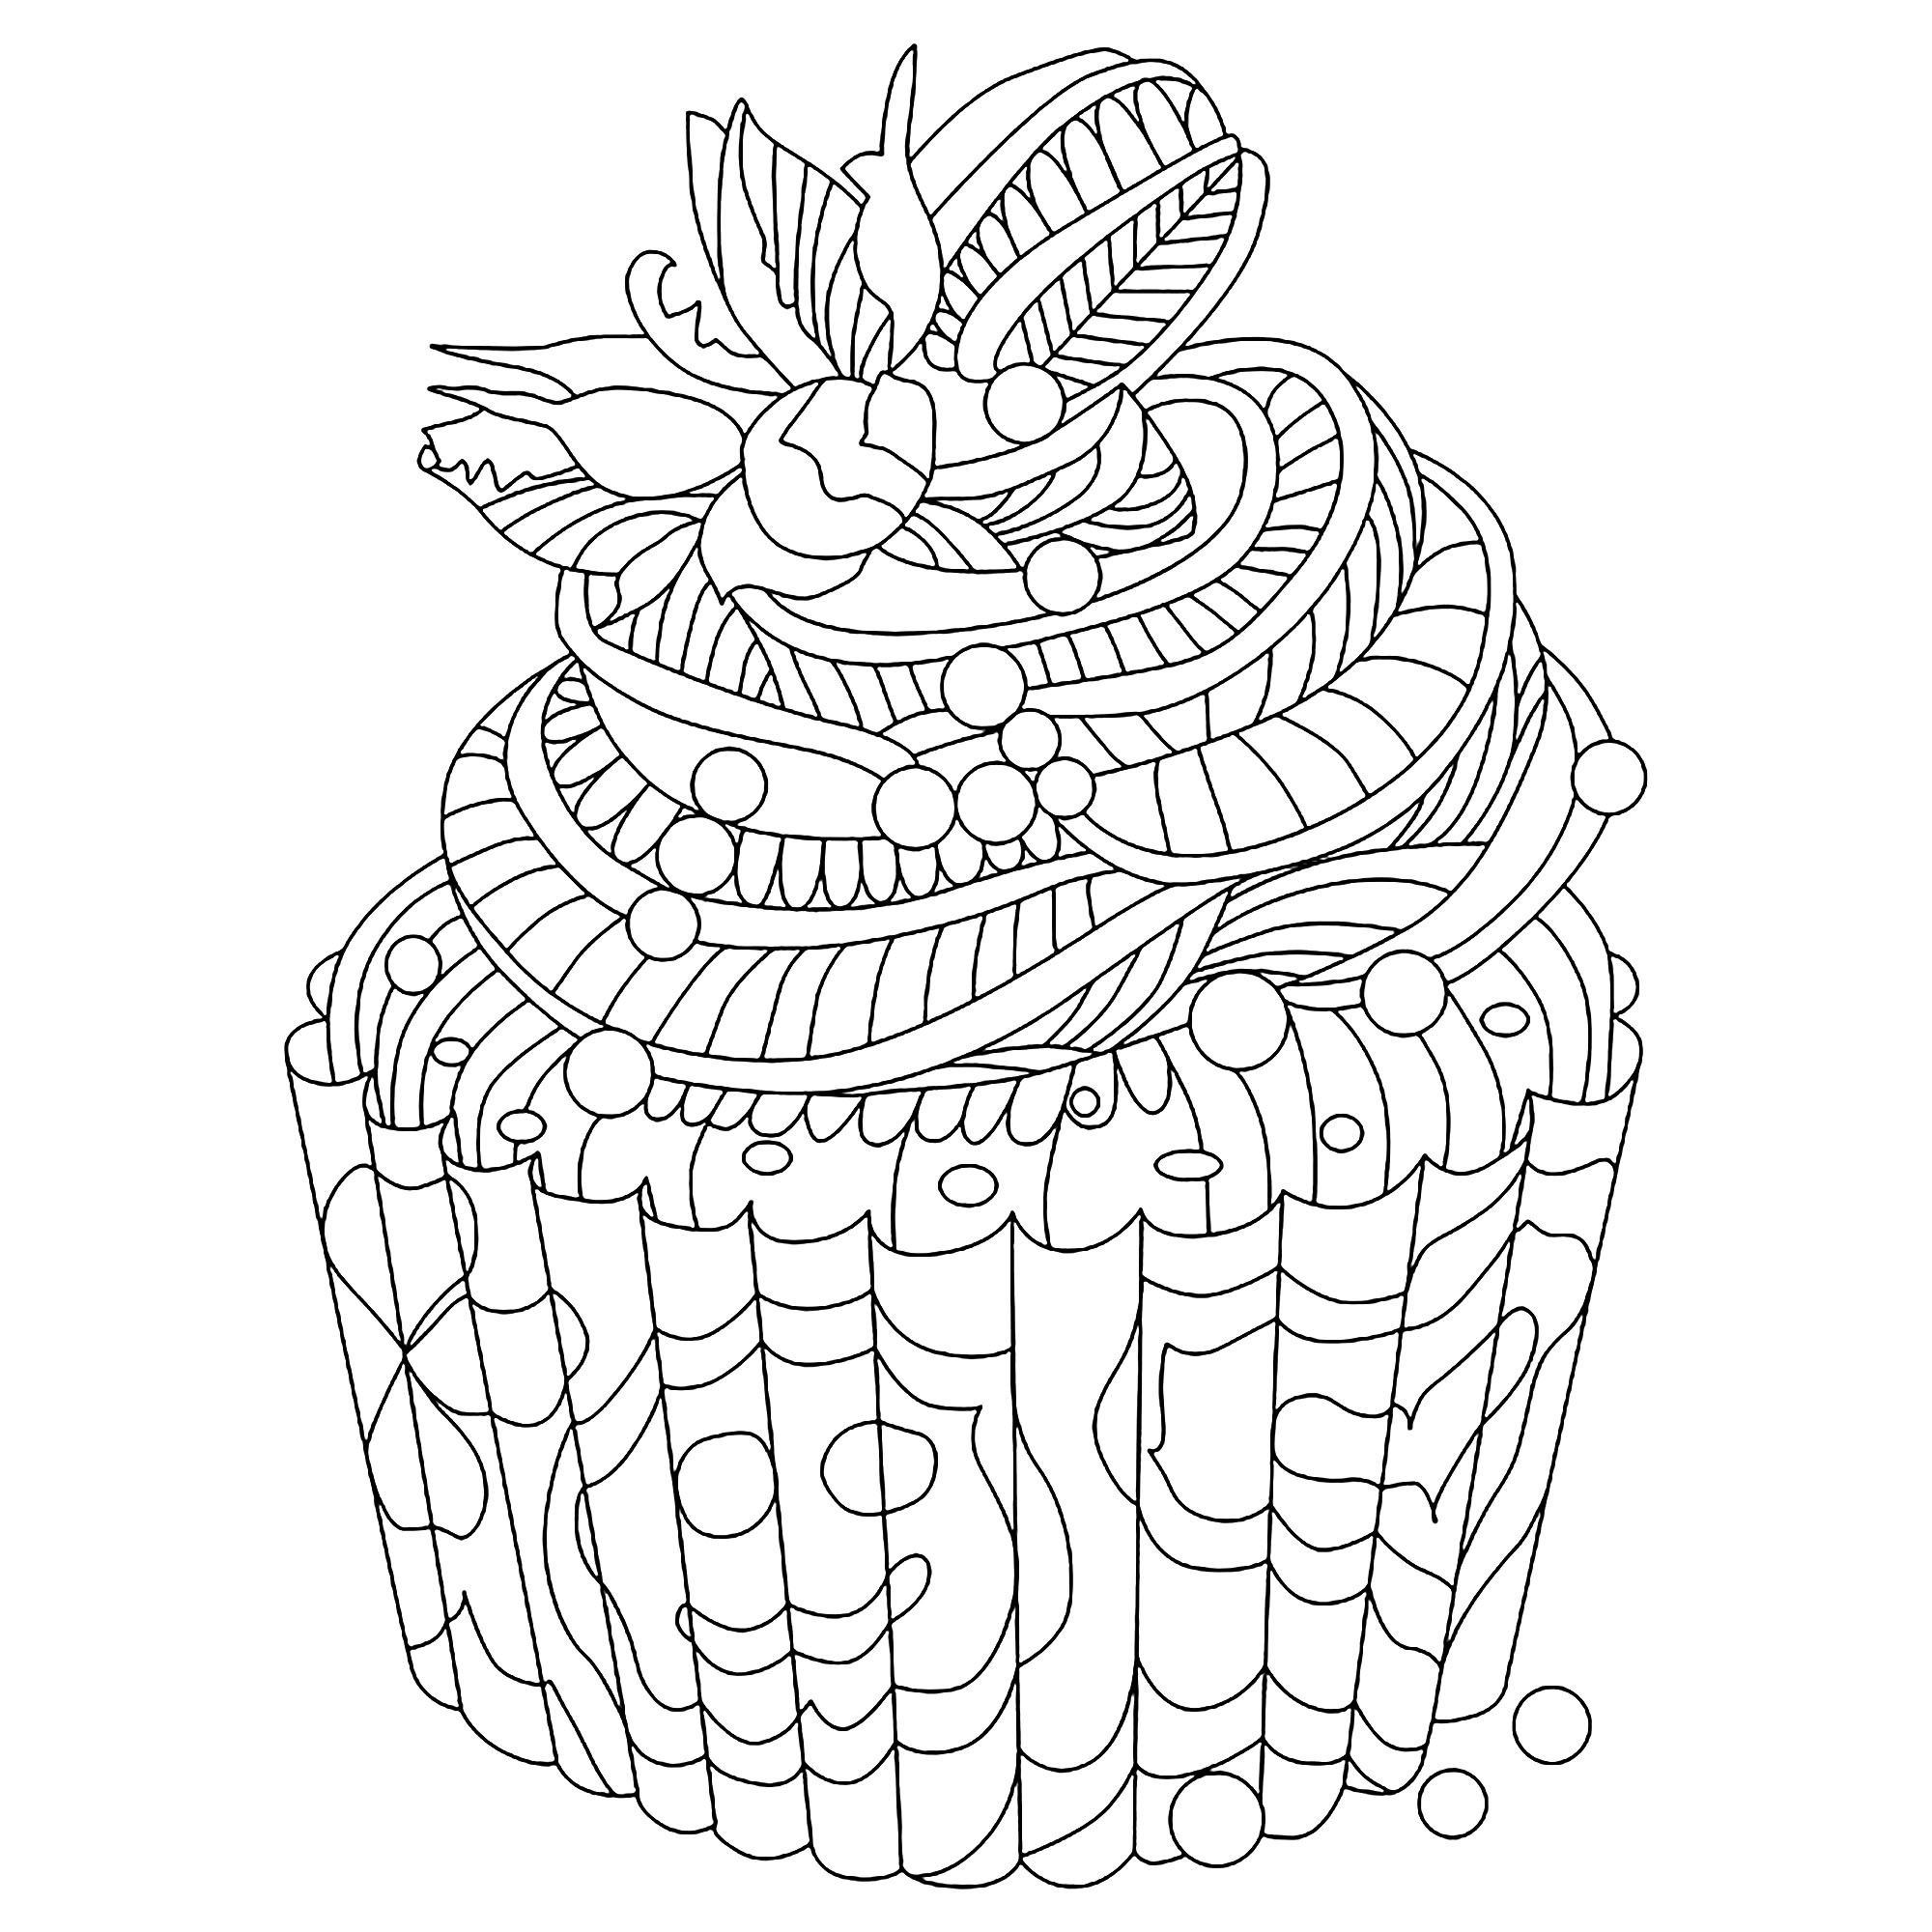 Small Doodle cupcake - Cupcakes Adult Coloring Pages